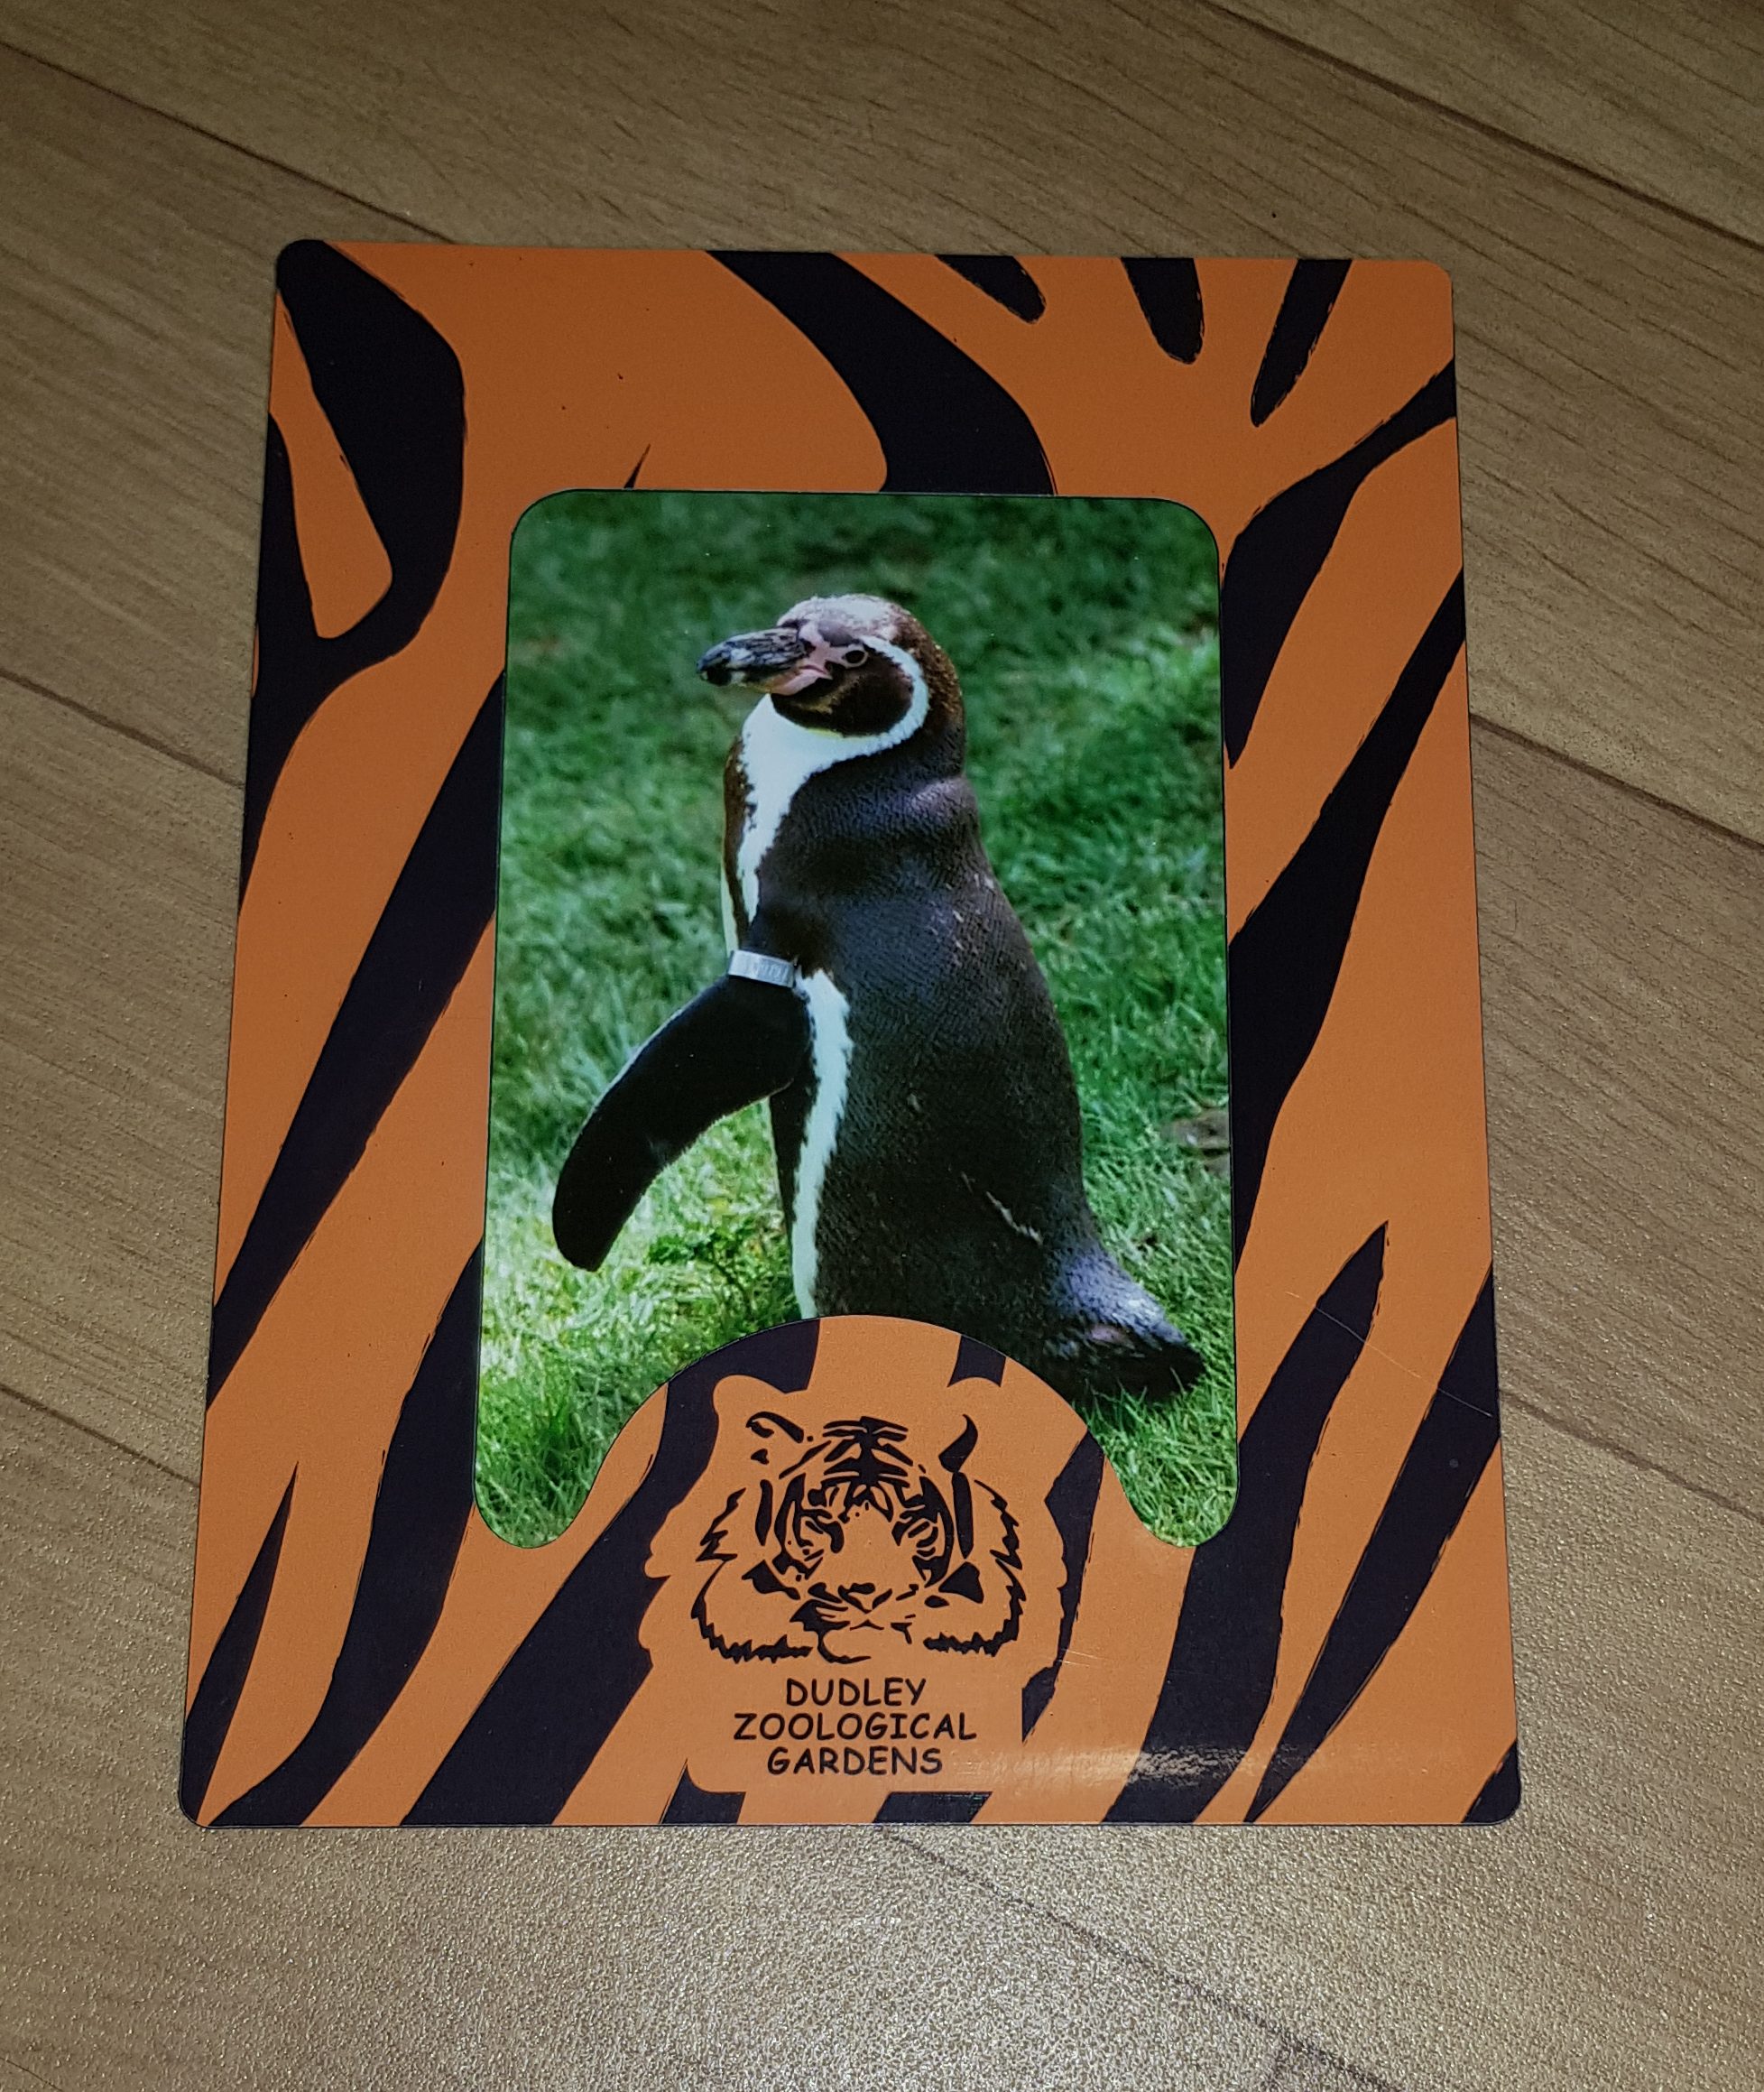 The picture that came with the penguin adoption pack from Dudley Zoo. A picture of a penguin is in a black and orange striped frame which says Dudley Zoological gardens at the bottom